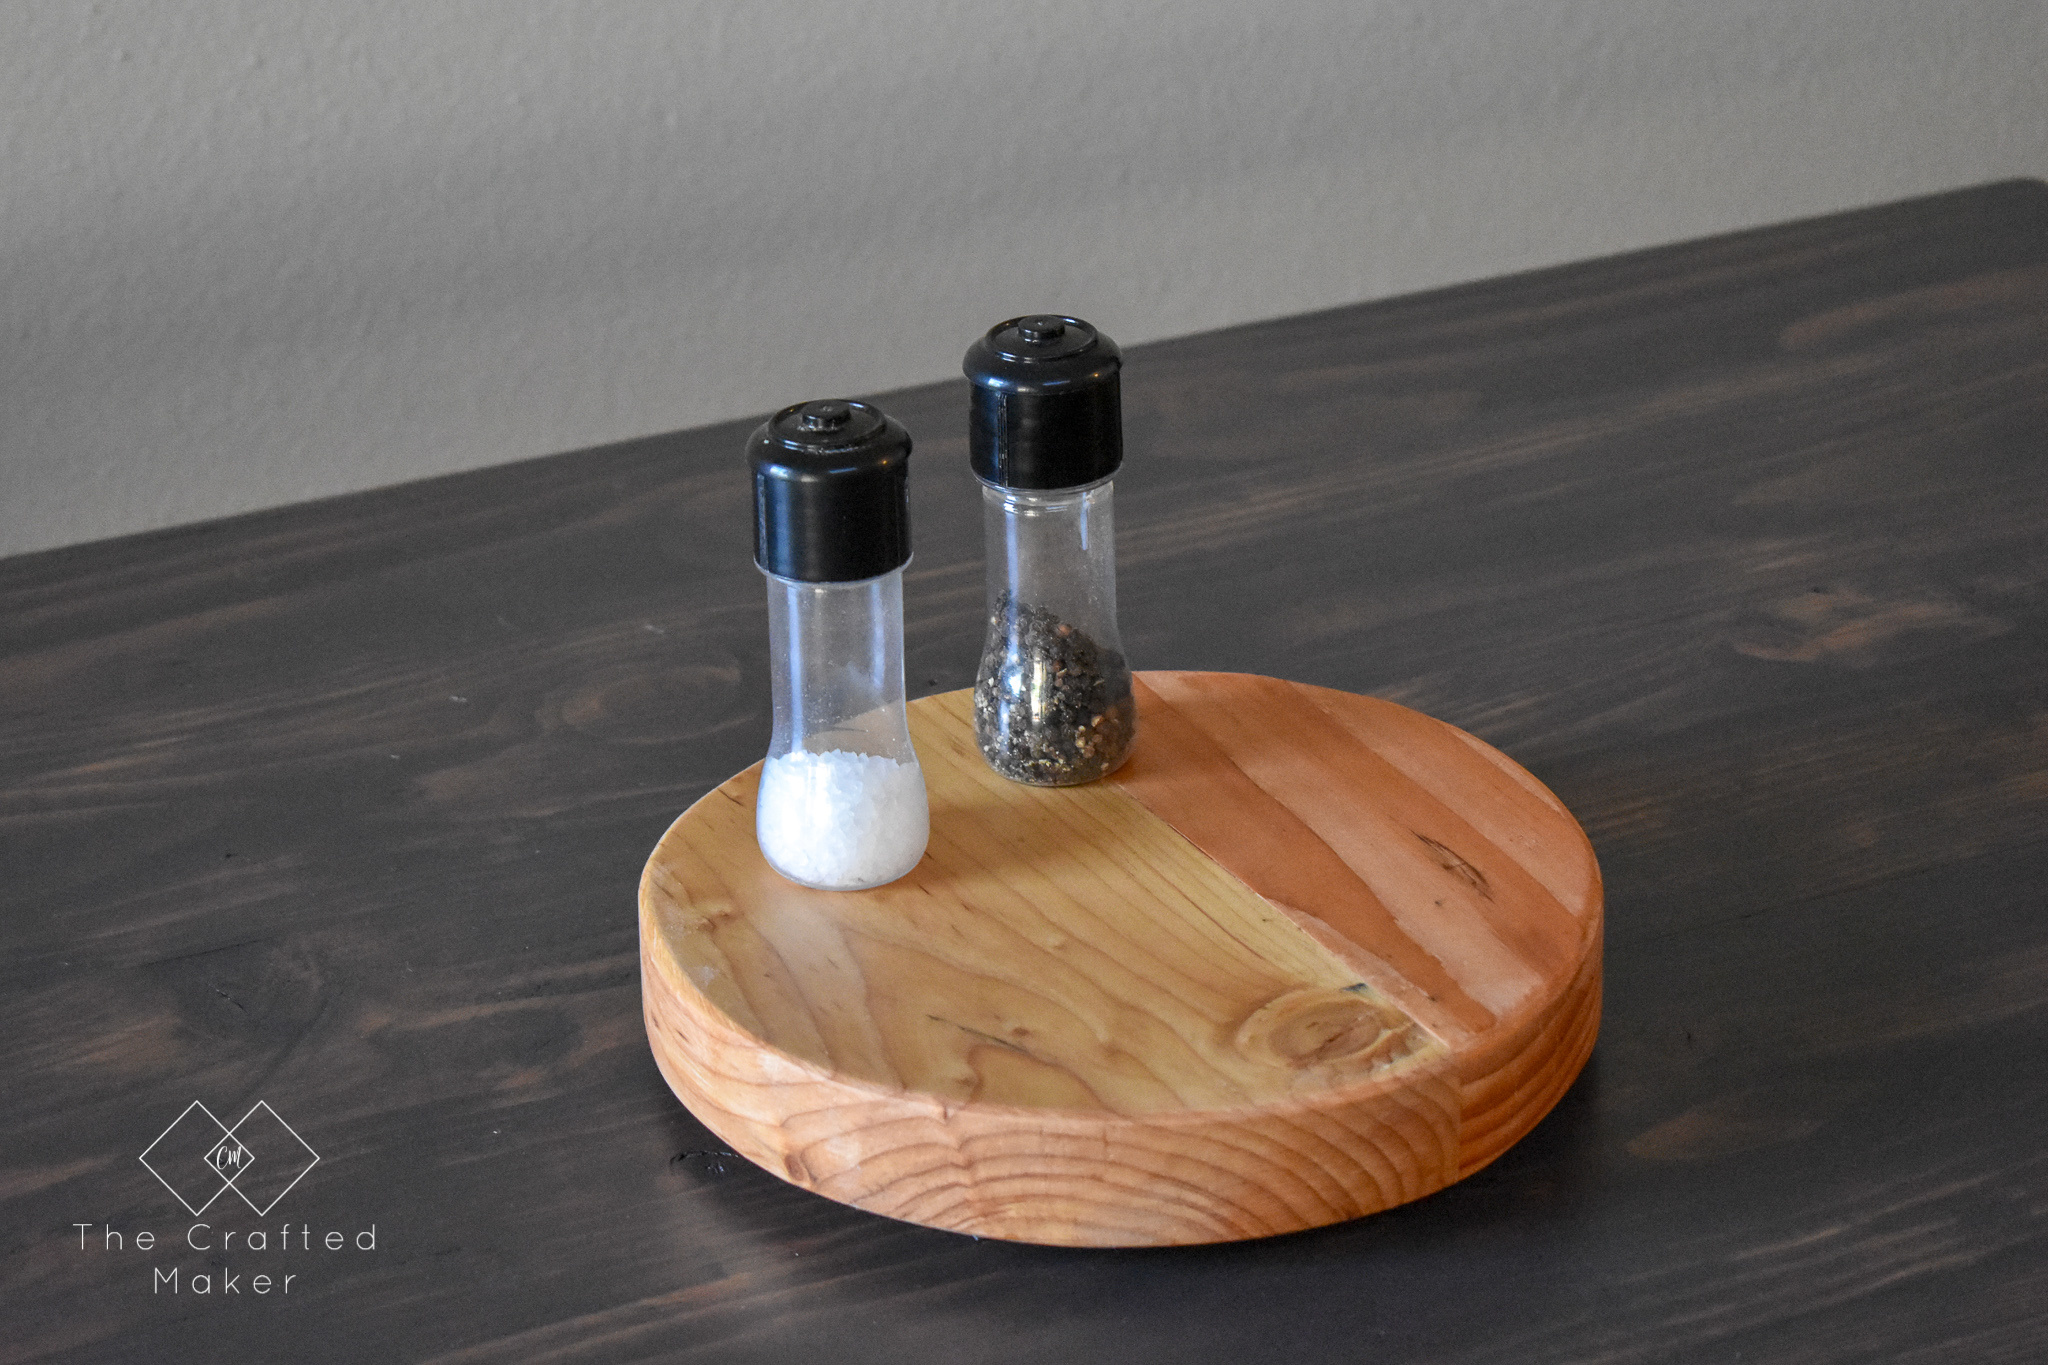 Scrap wood is something most of us have more than enough of. Why not make this wooden Lazy Susan and put that scrap wood to good use!